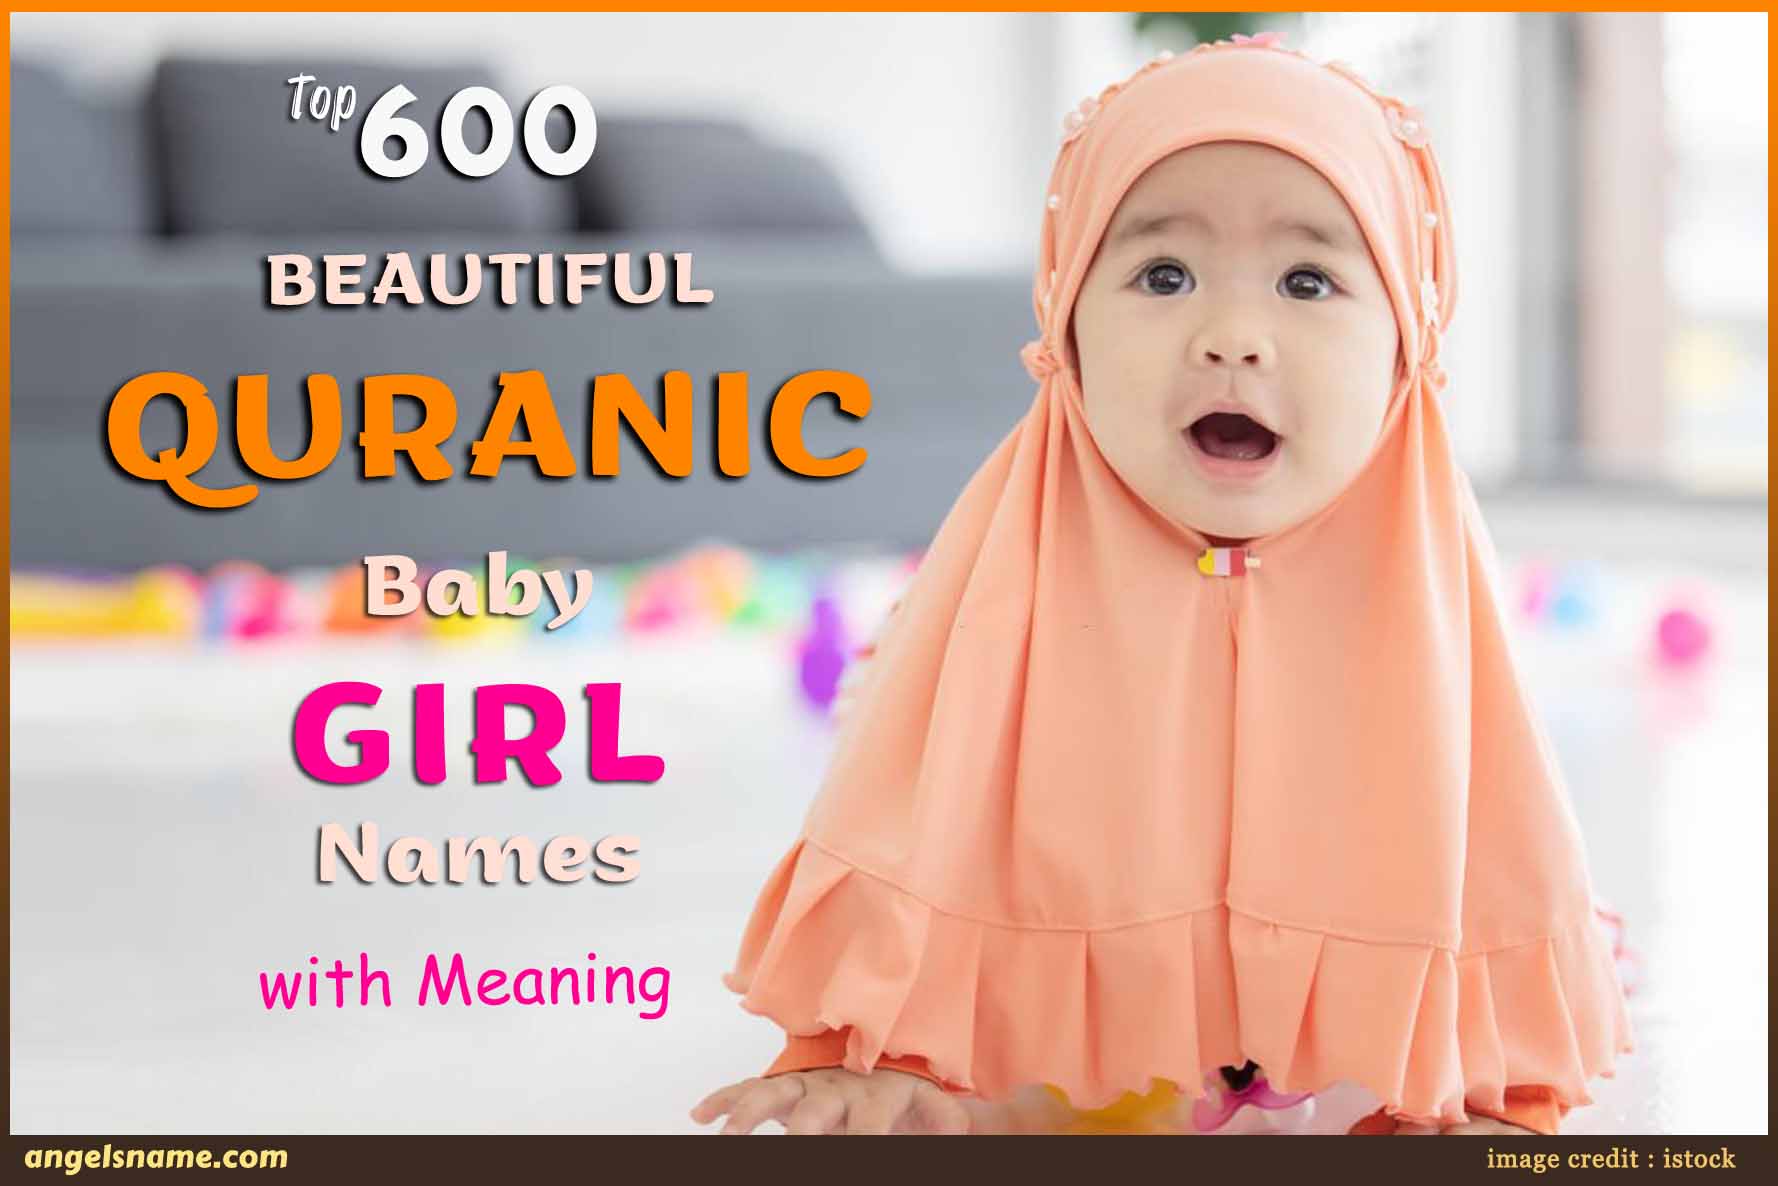 https://angelsname.com/image/top-600-beautiful-islamic-baby-girl-names-inspired-by-the-quran.jpg